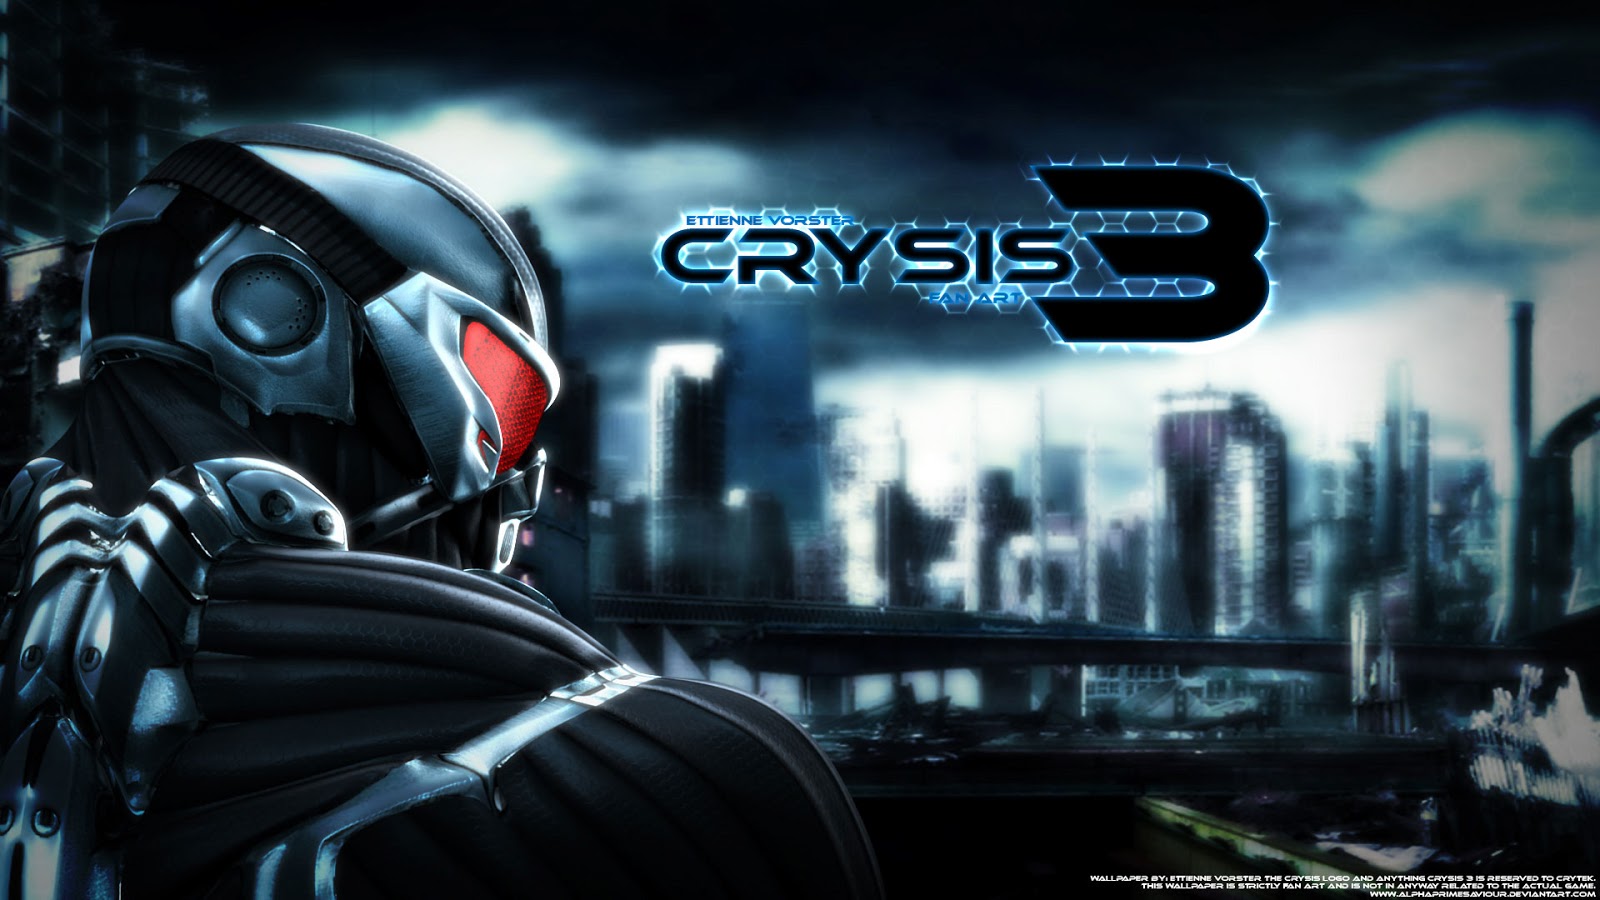 crysis 3 free download full version with crack for pc game